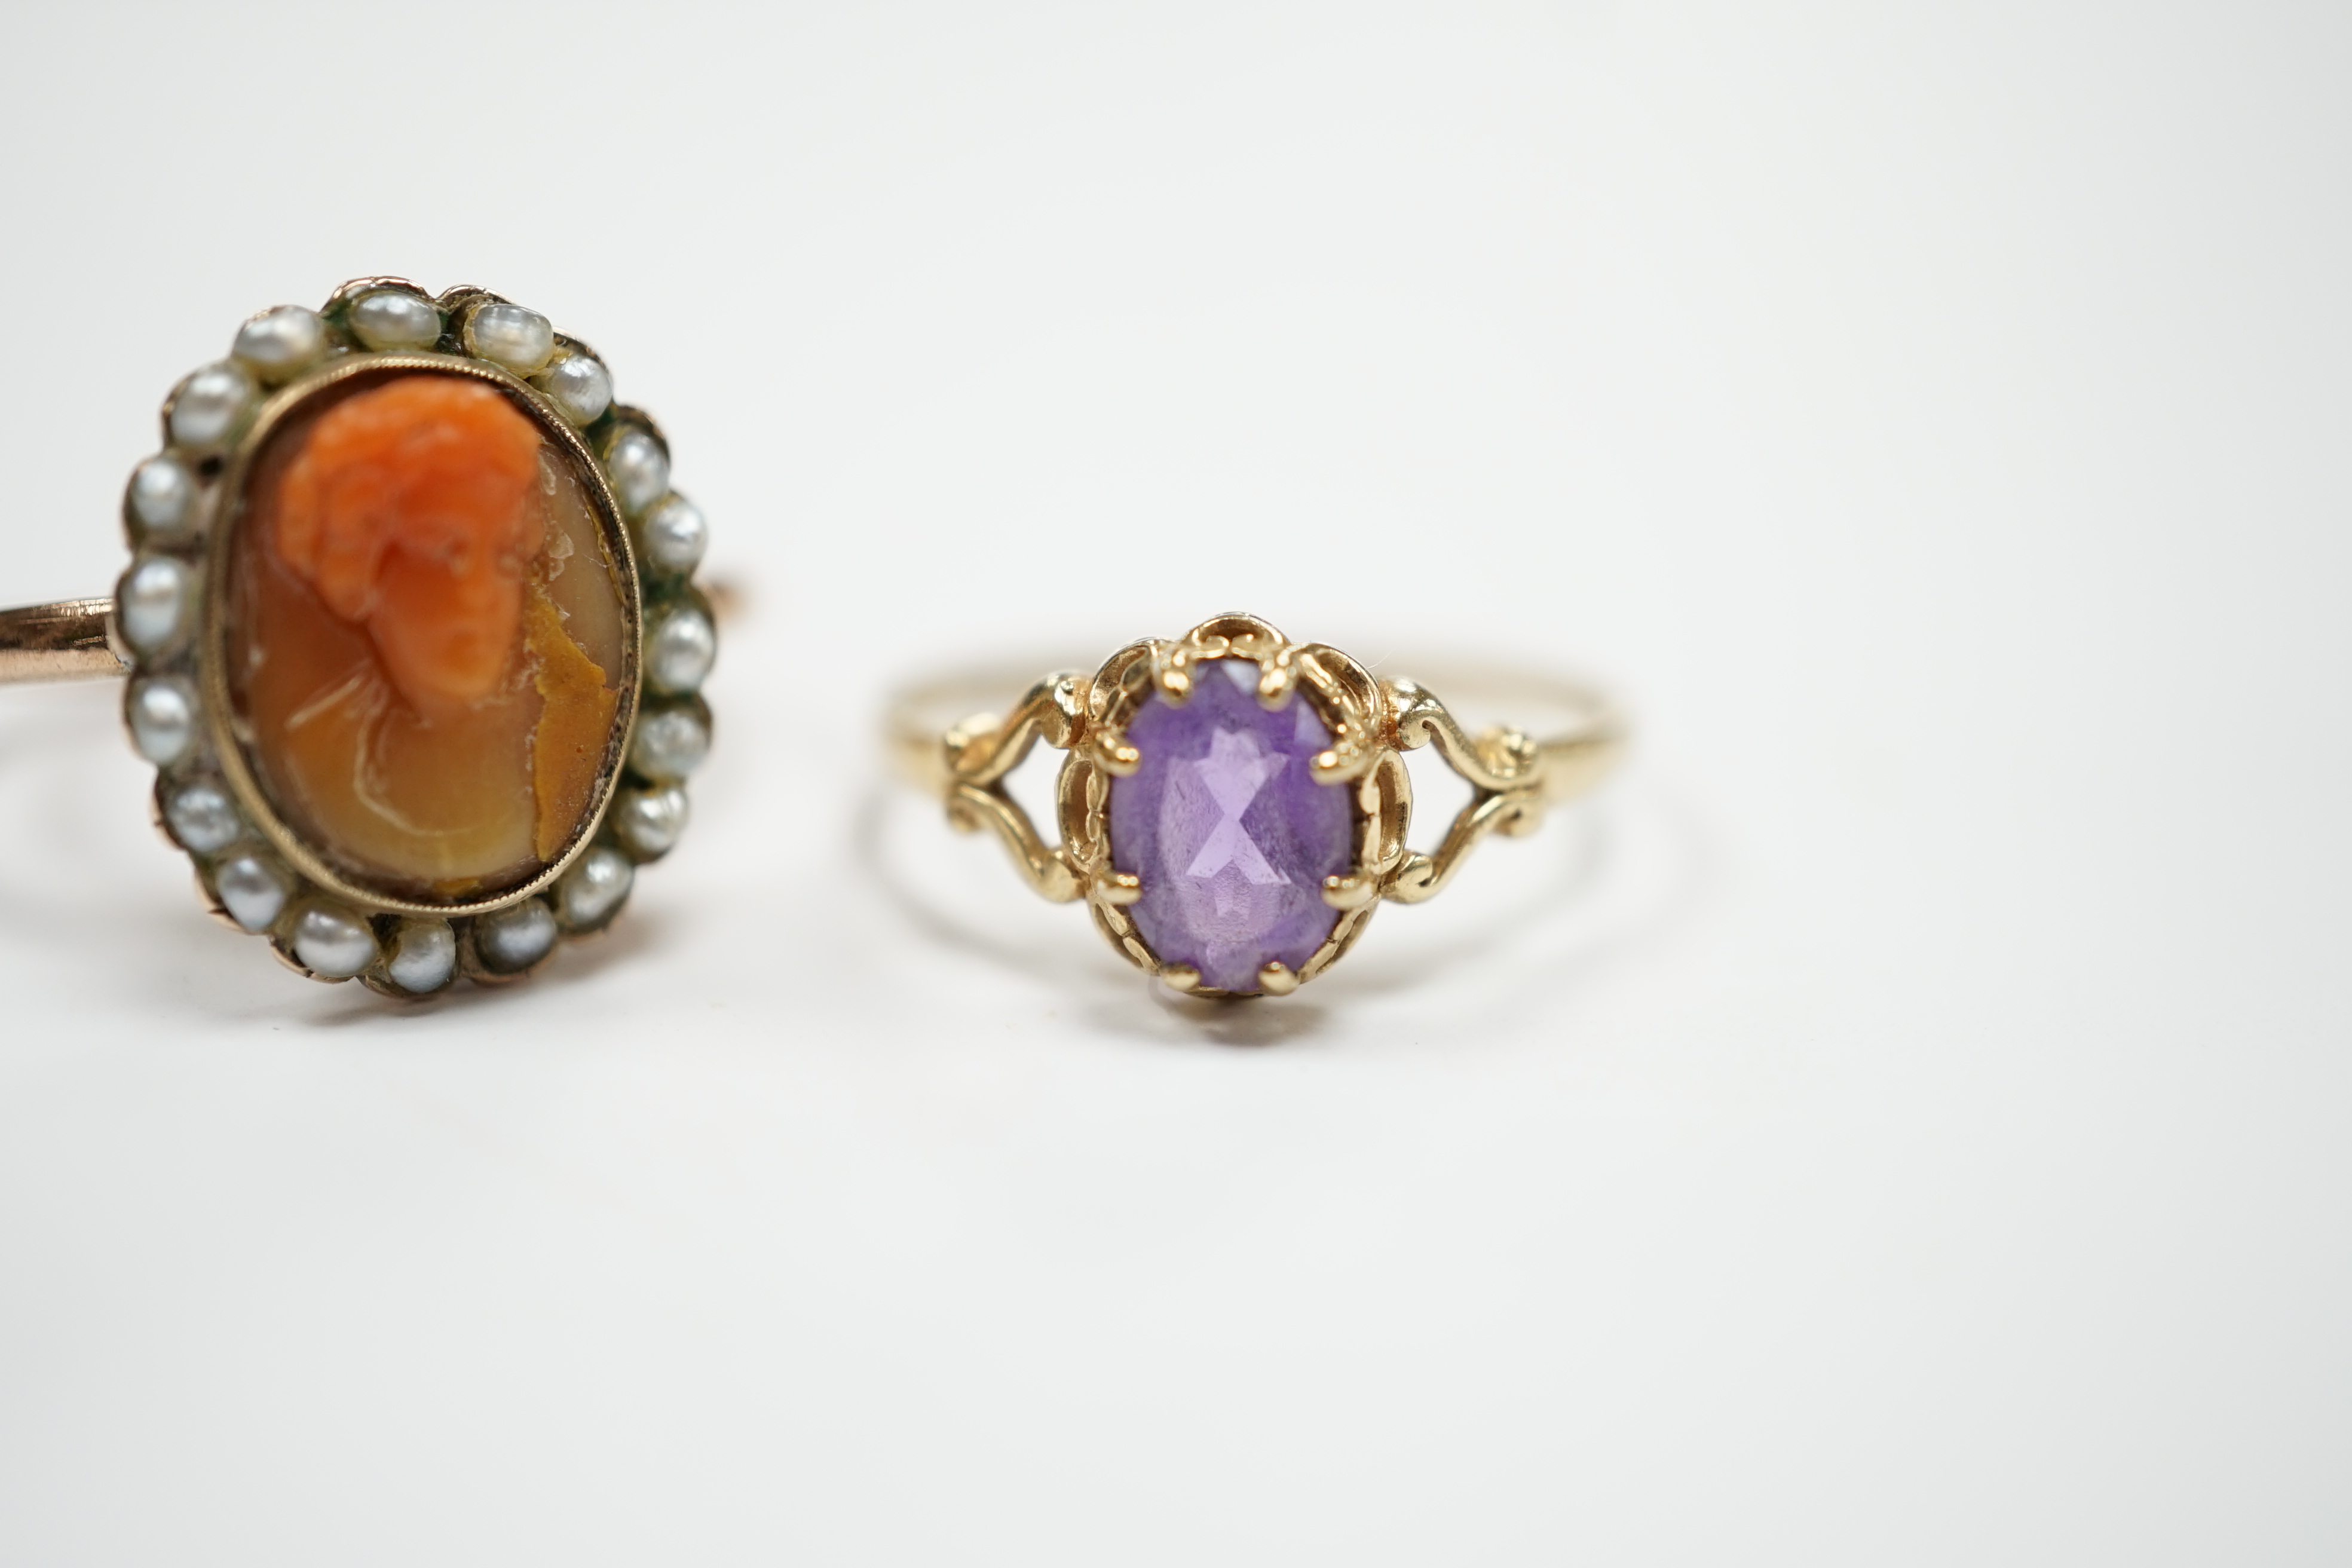 A modern 9ct gold and single stone amethyst set ring and a yellow metal, carved coral and split pearl set ring.